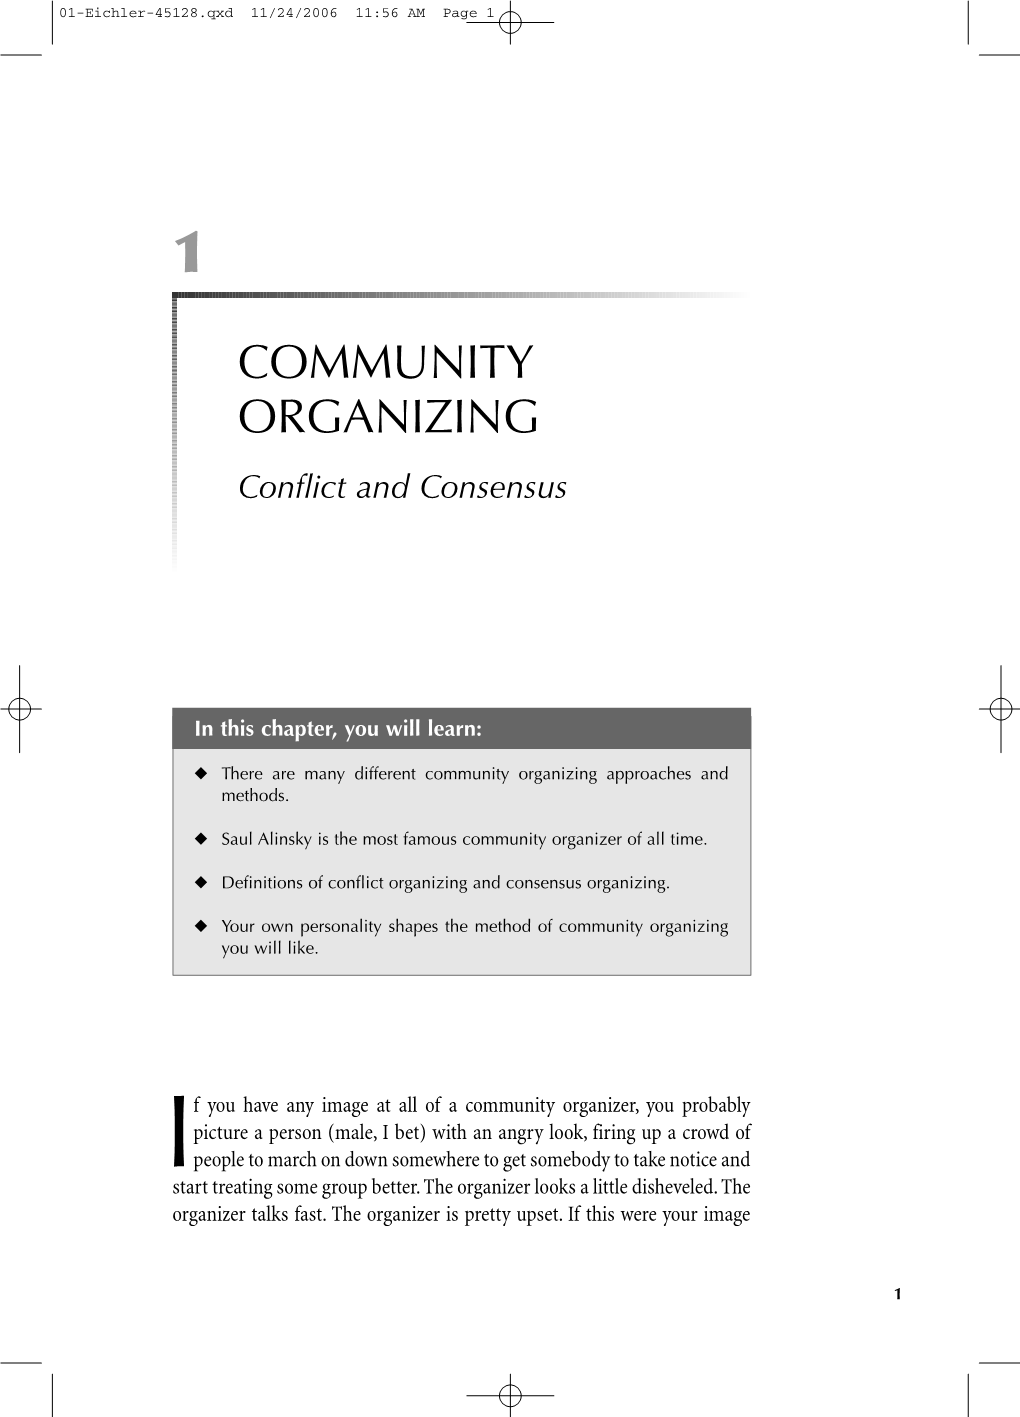 COMMUNITY ORGANIZING Conflict and Consensus